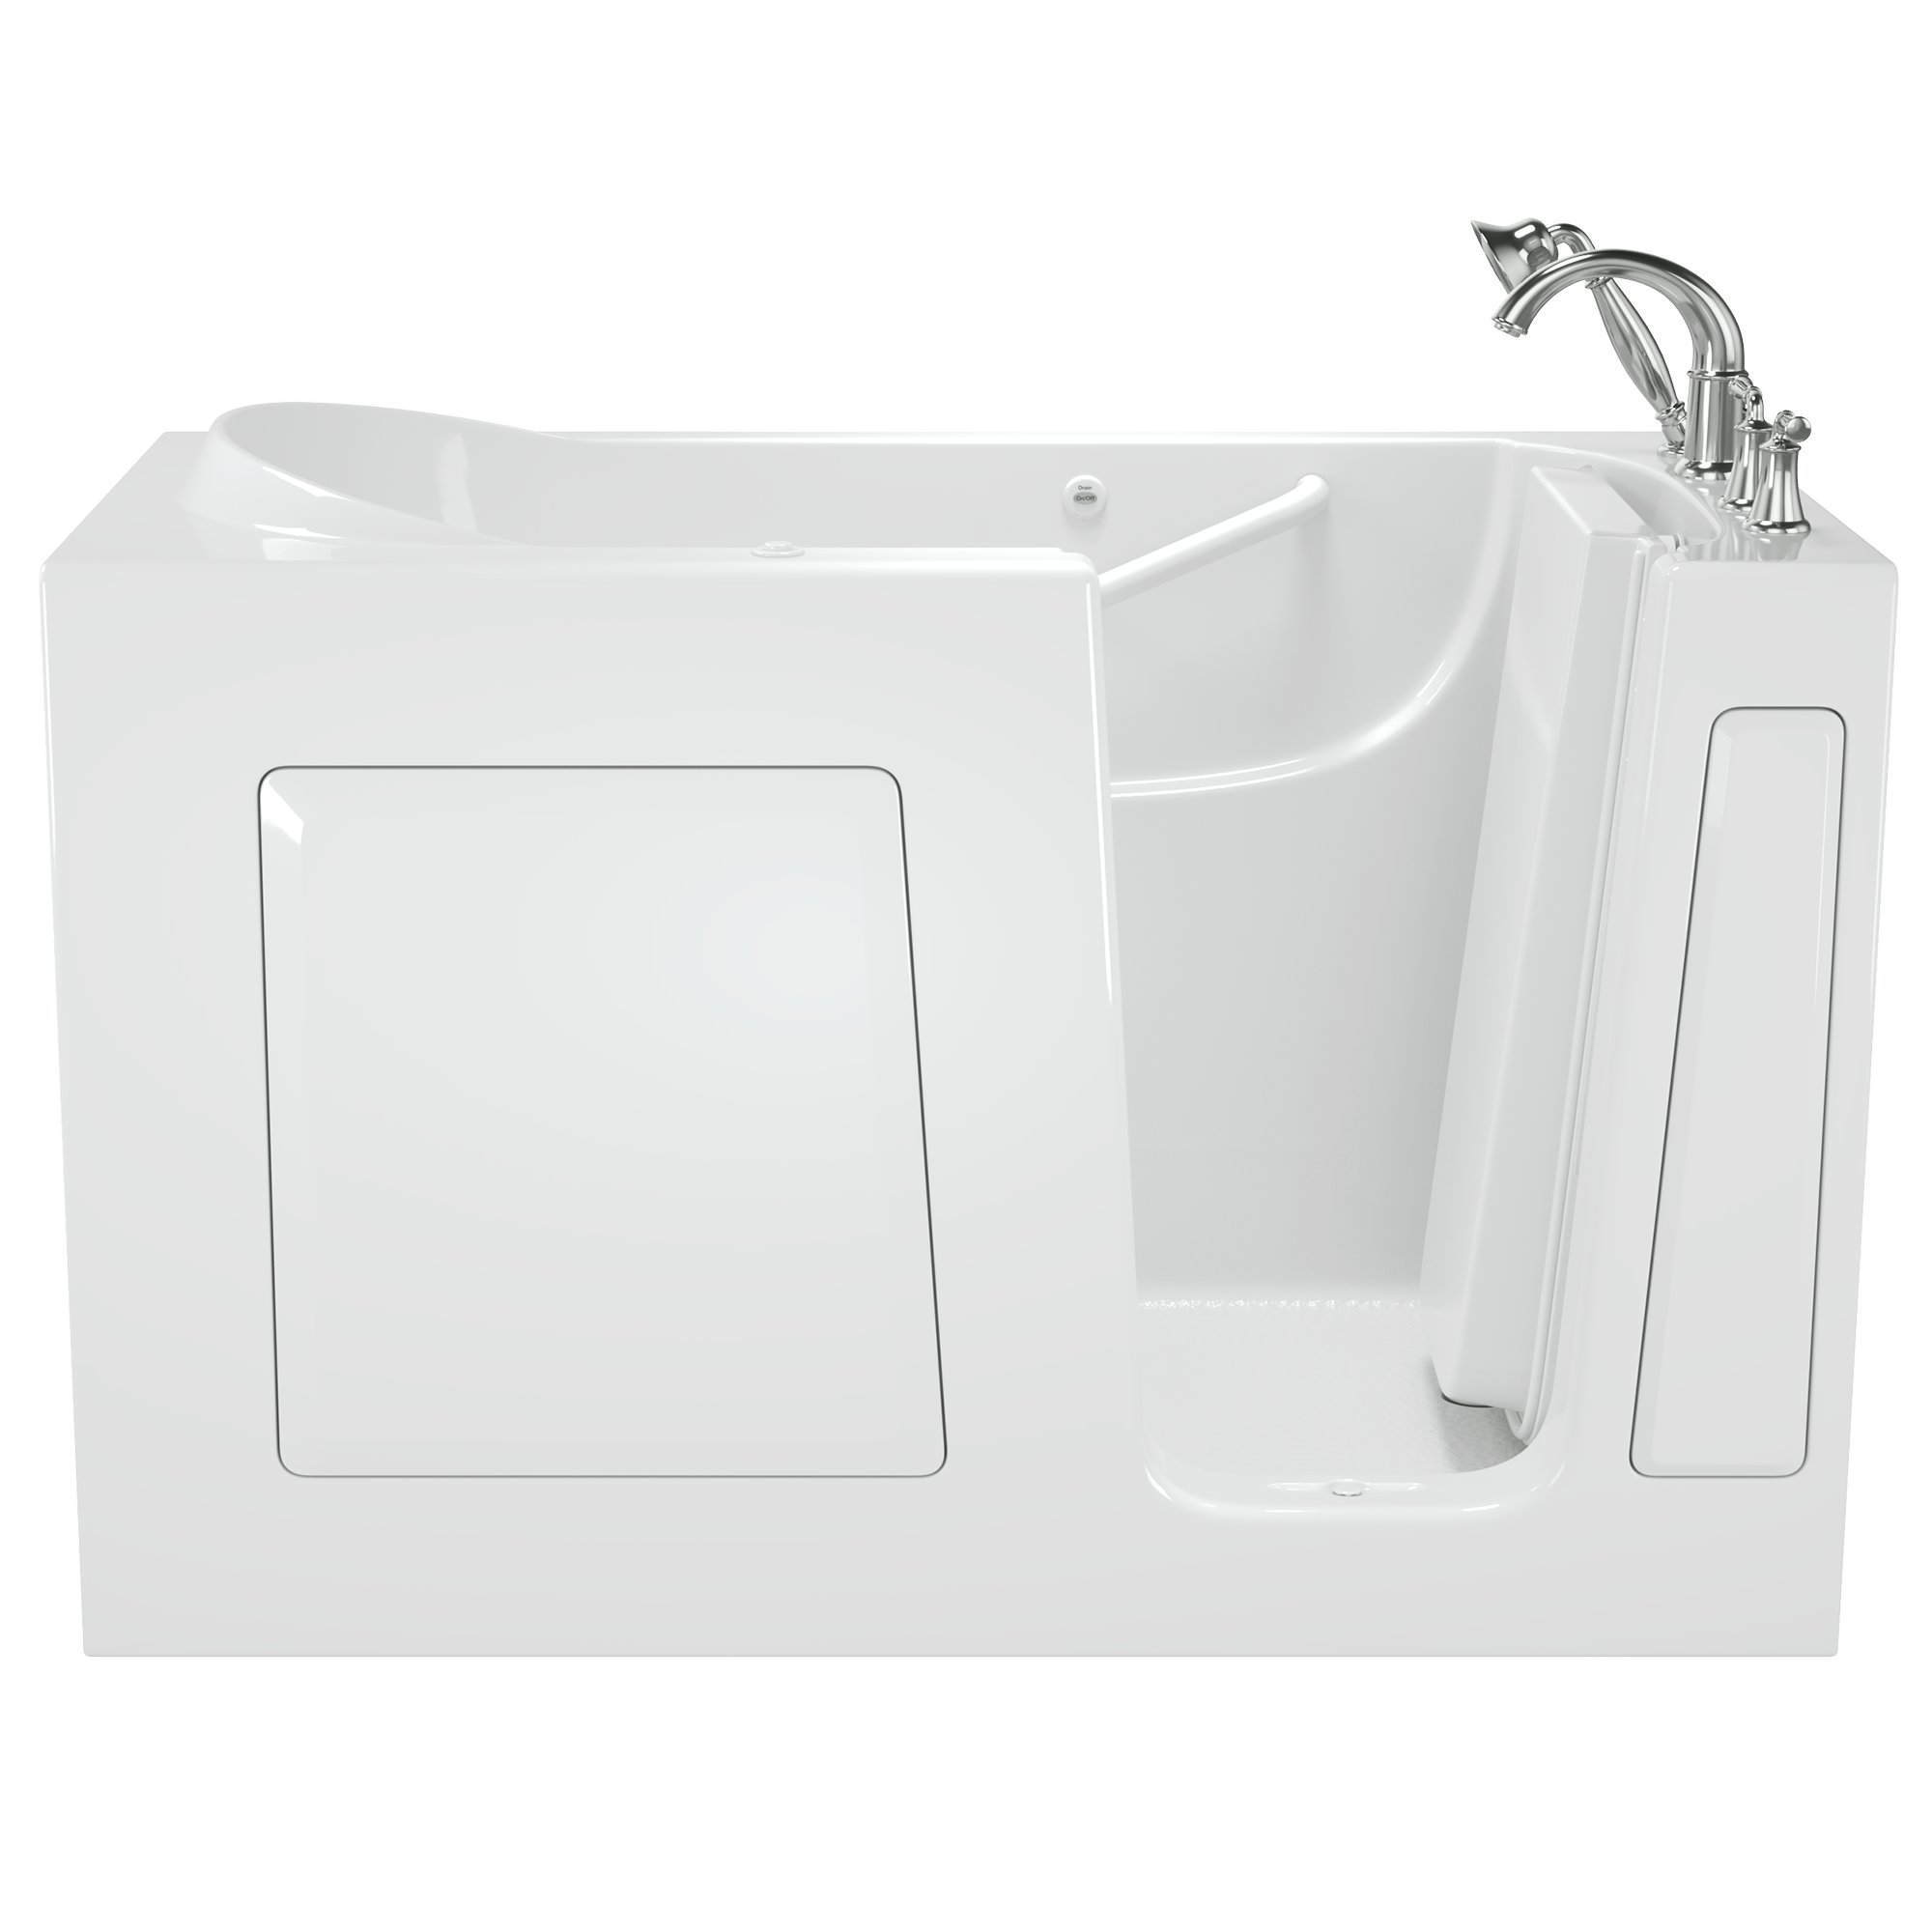 Gelcoat Value Series 30 x 60  Inch Walk in Tub With Whirlpool System   Right Hand Drain With Faucet WIB WHITE